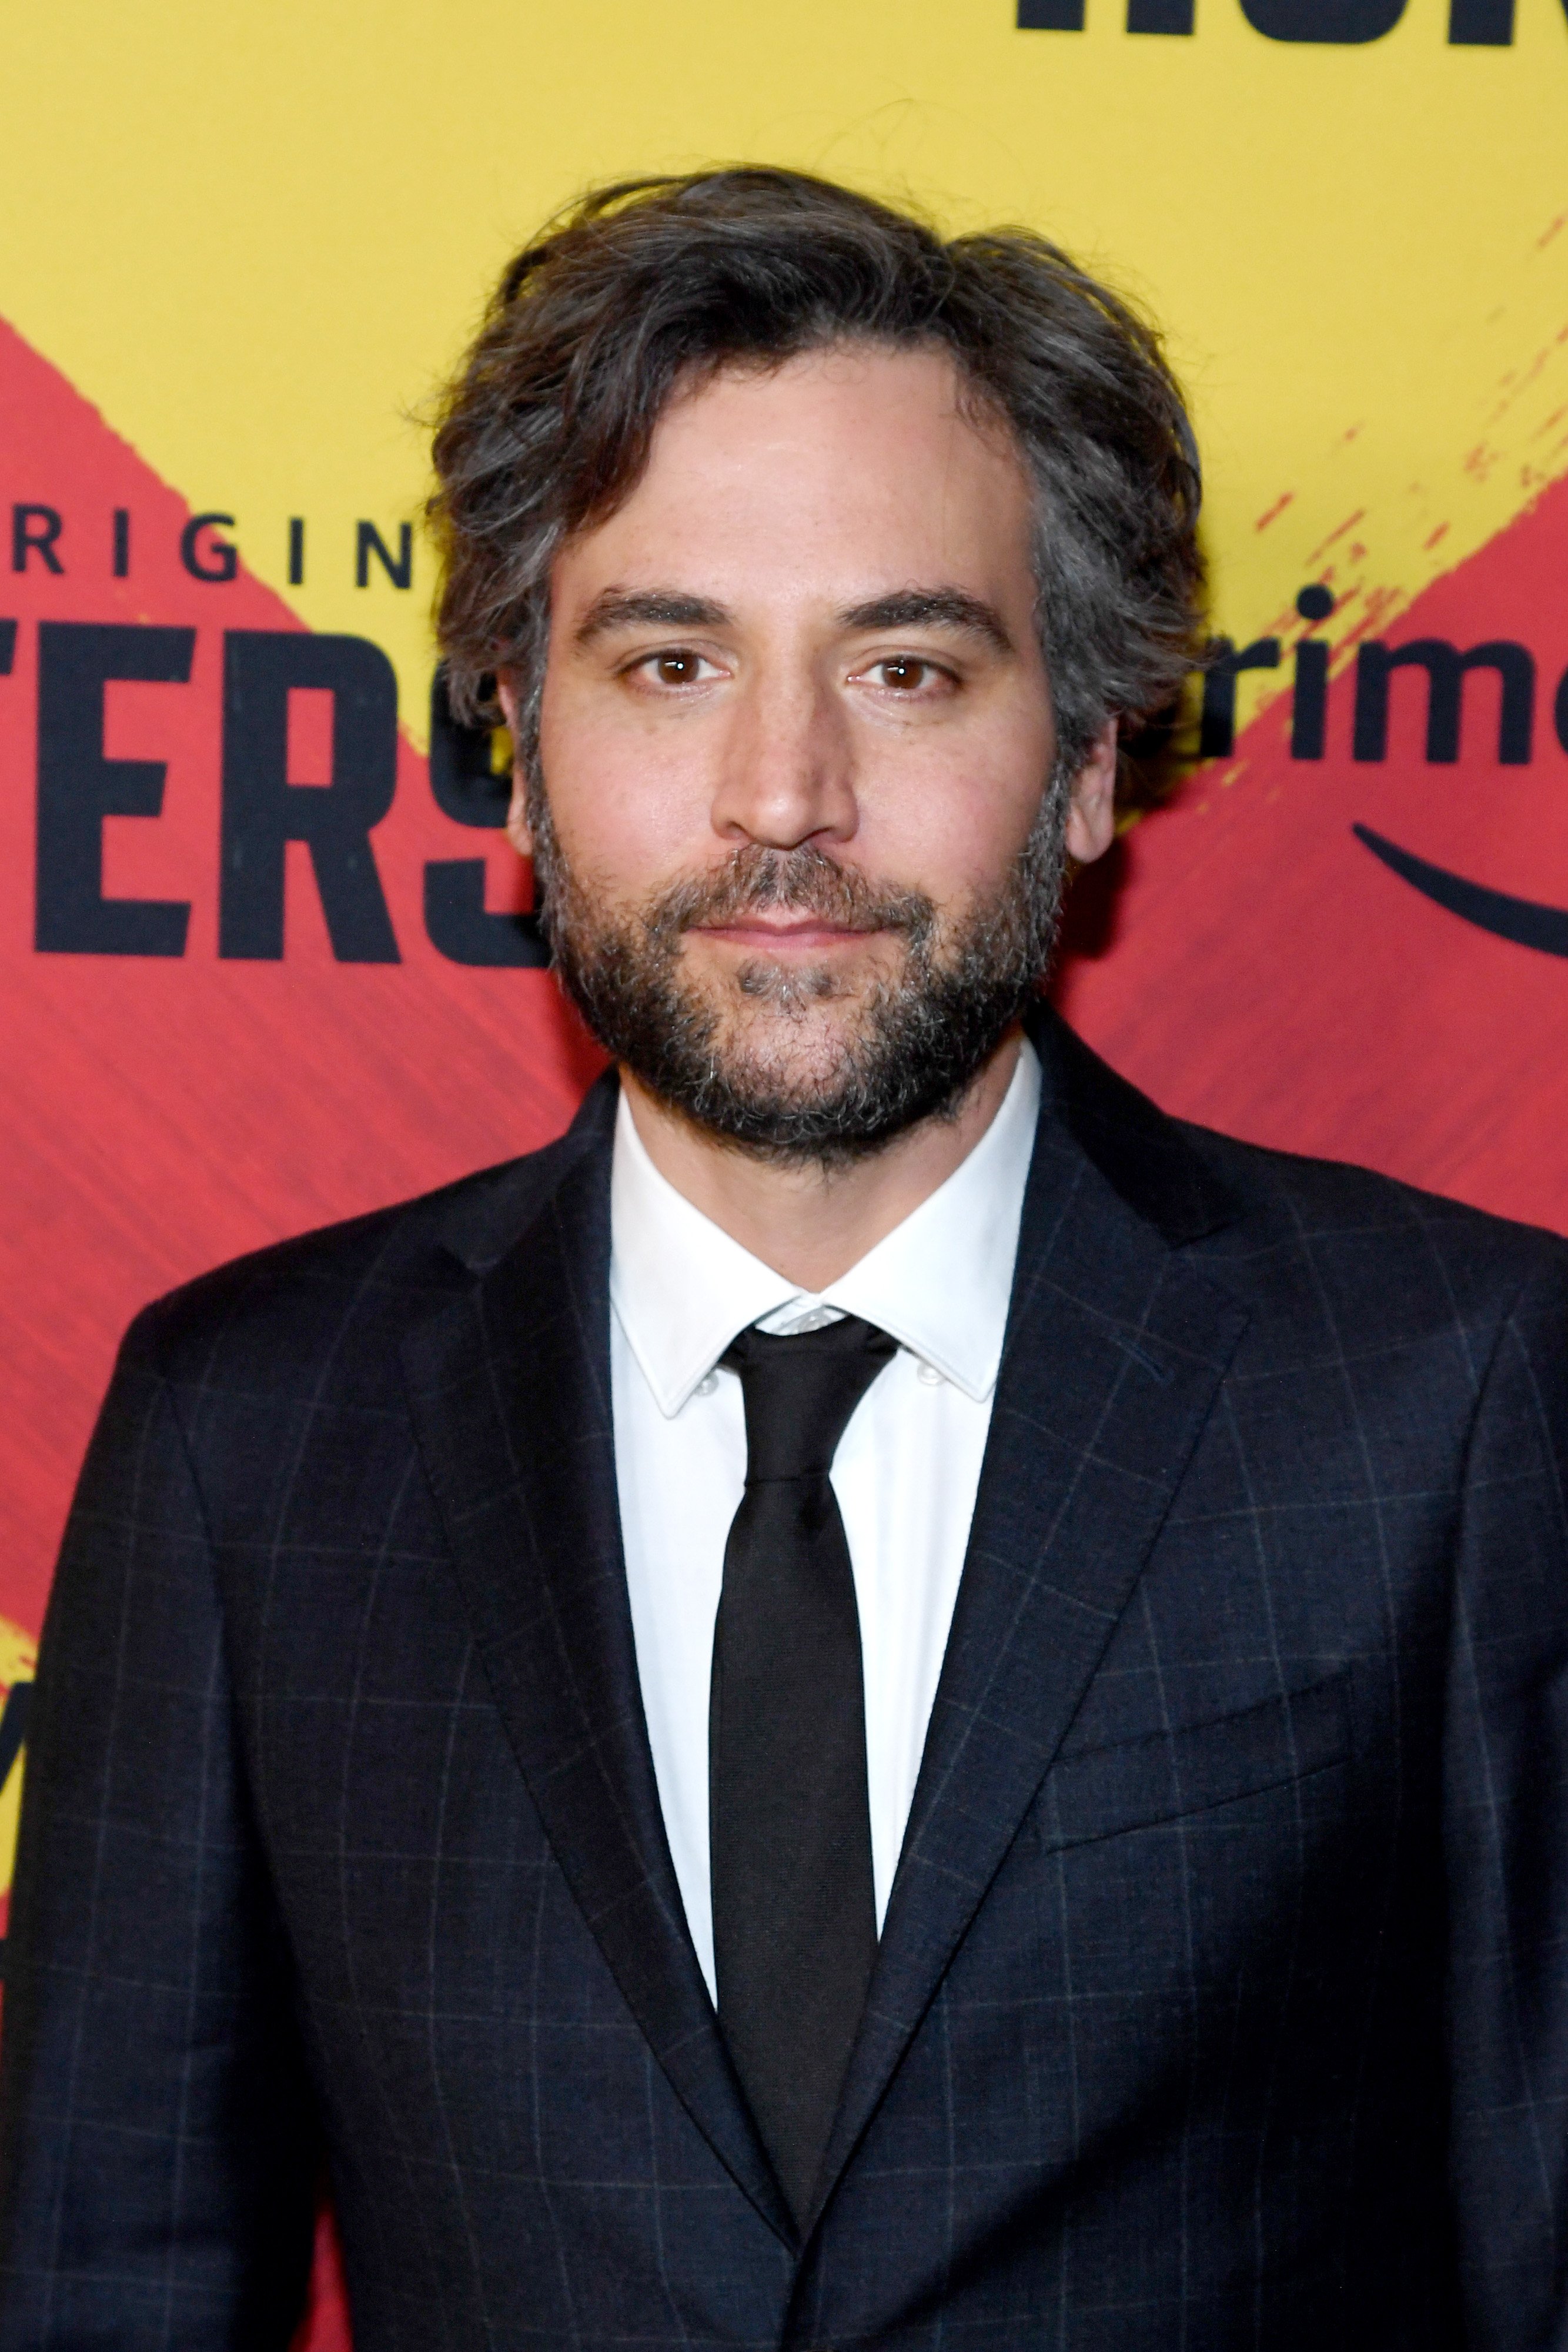 Josh Radnor at the premiere of "Hunters" on February 19, 2020 in Los Angeles, California. | Source: Getty Images